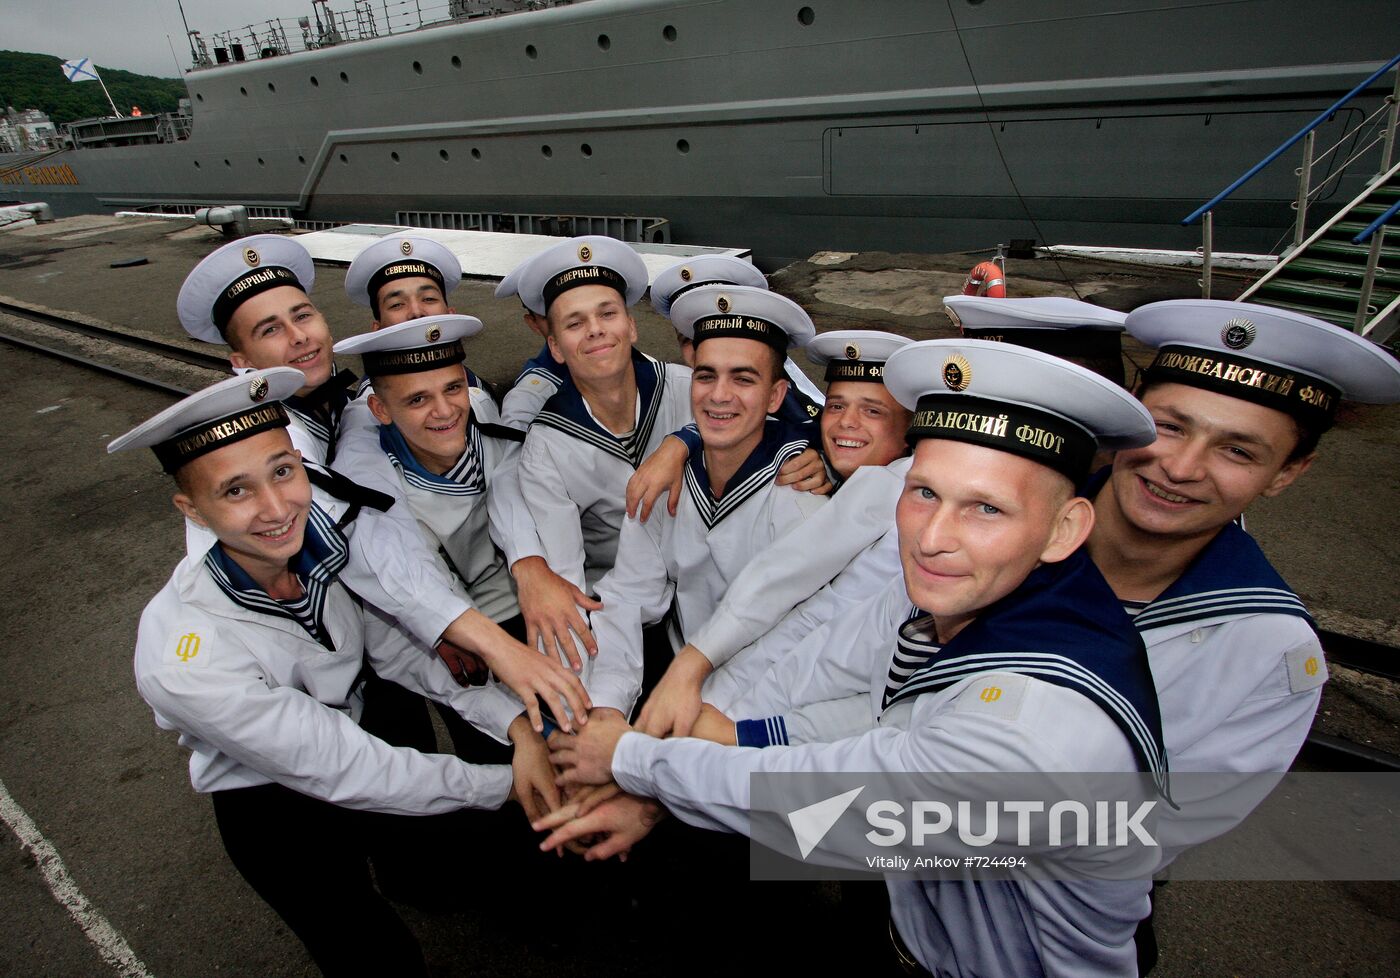 Arctic Navy sailors at Peter the Great cruiser farewell ceremony